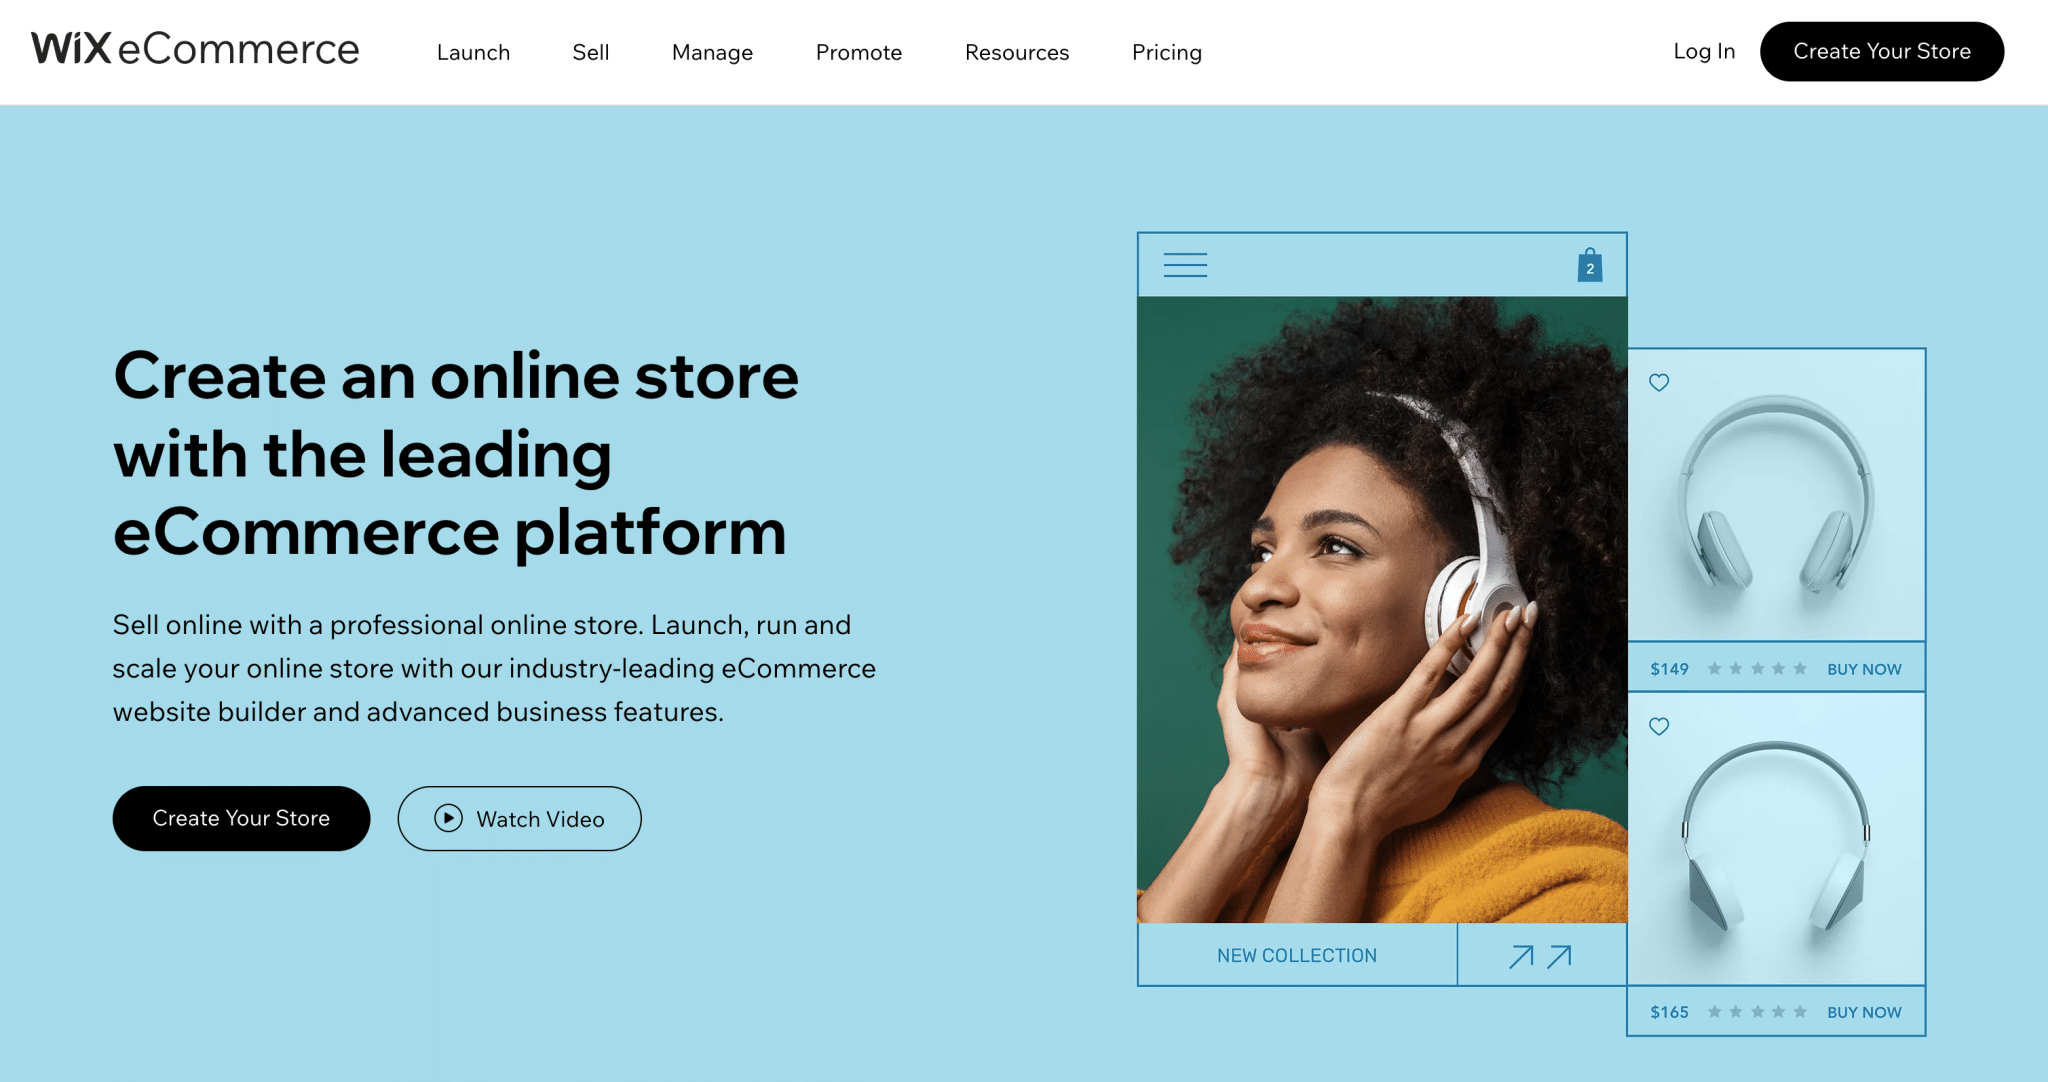 The Wix tool allows you to create an ecommerce store thanks to Wix eCommerce.